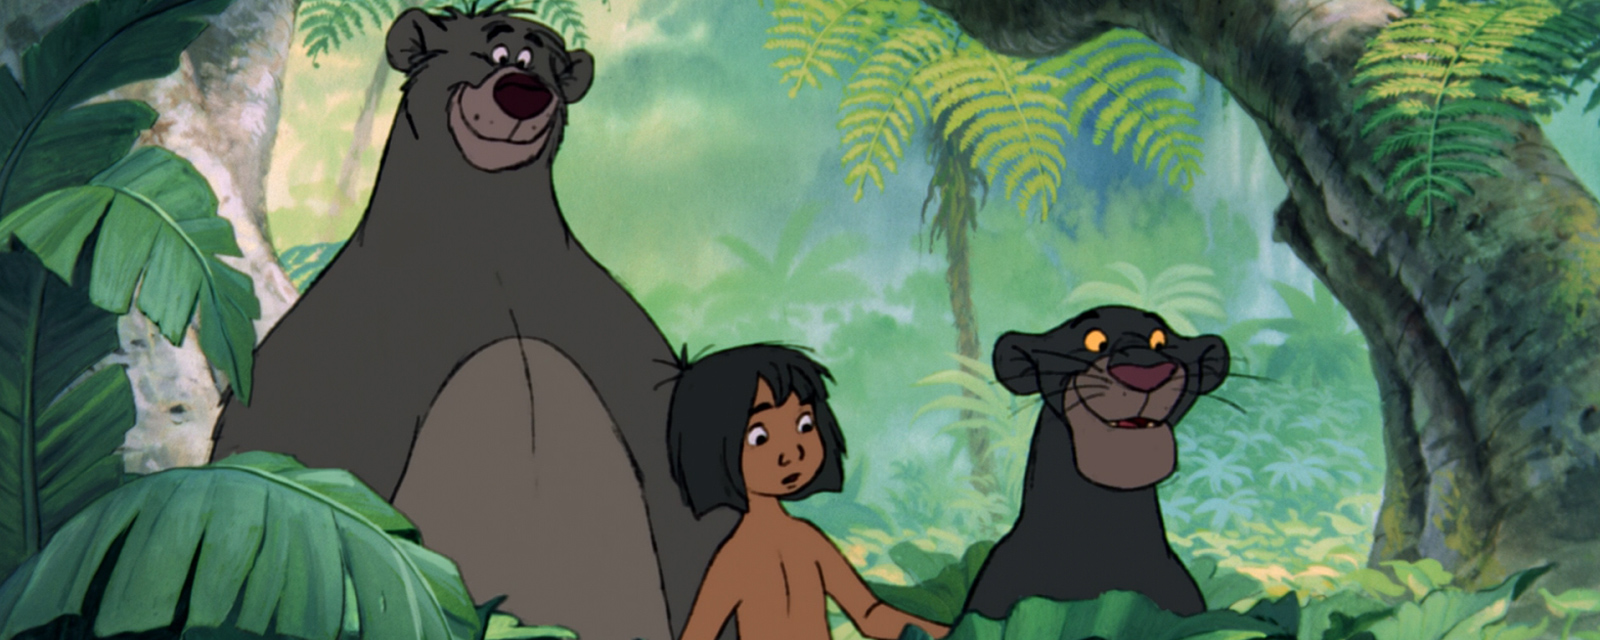 Cinema '67 Revisited: The Jungle Book